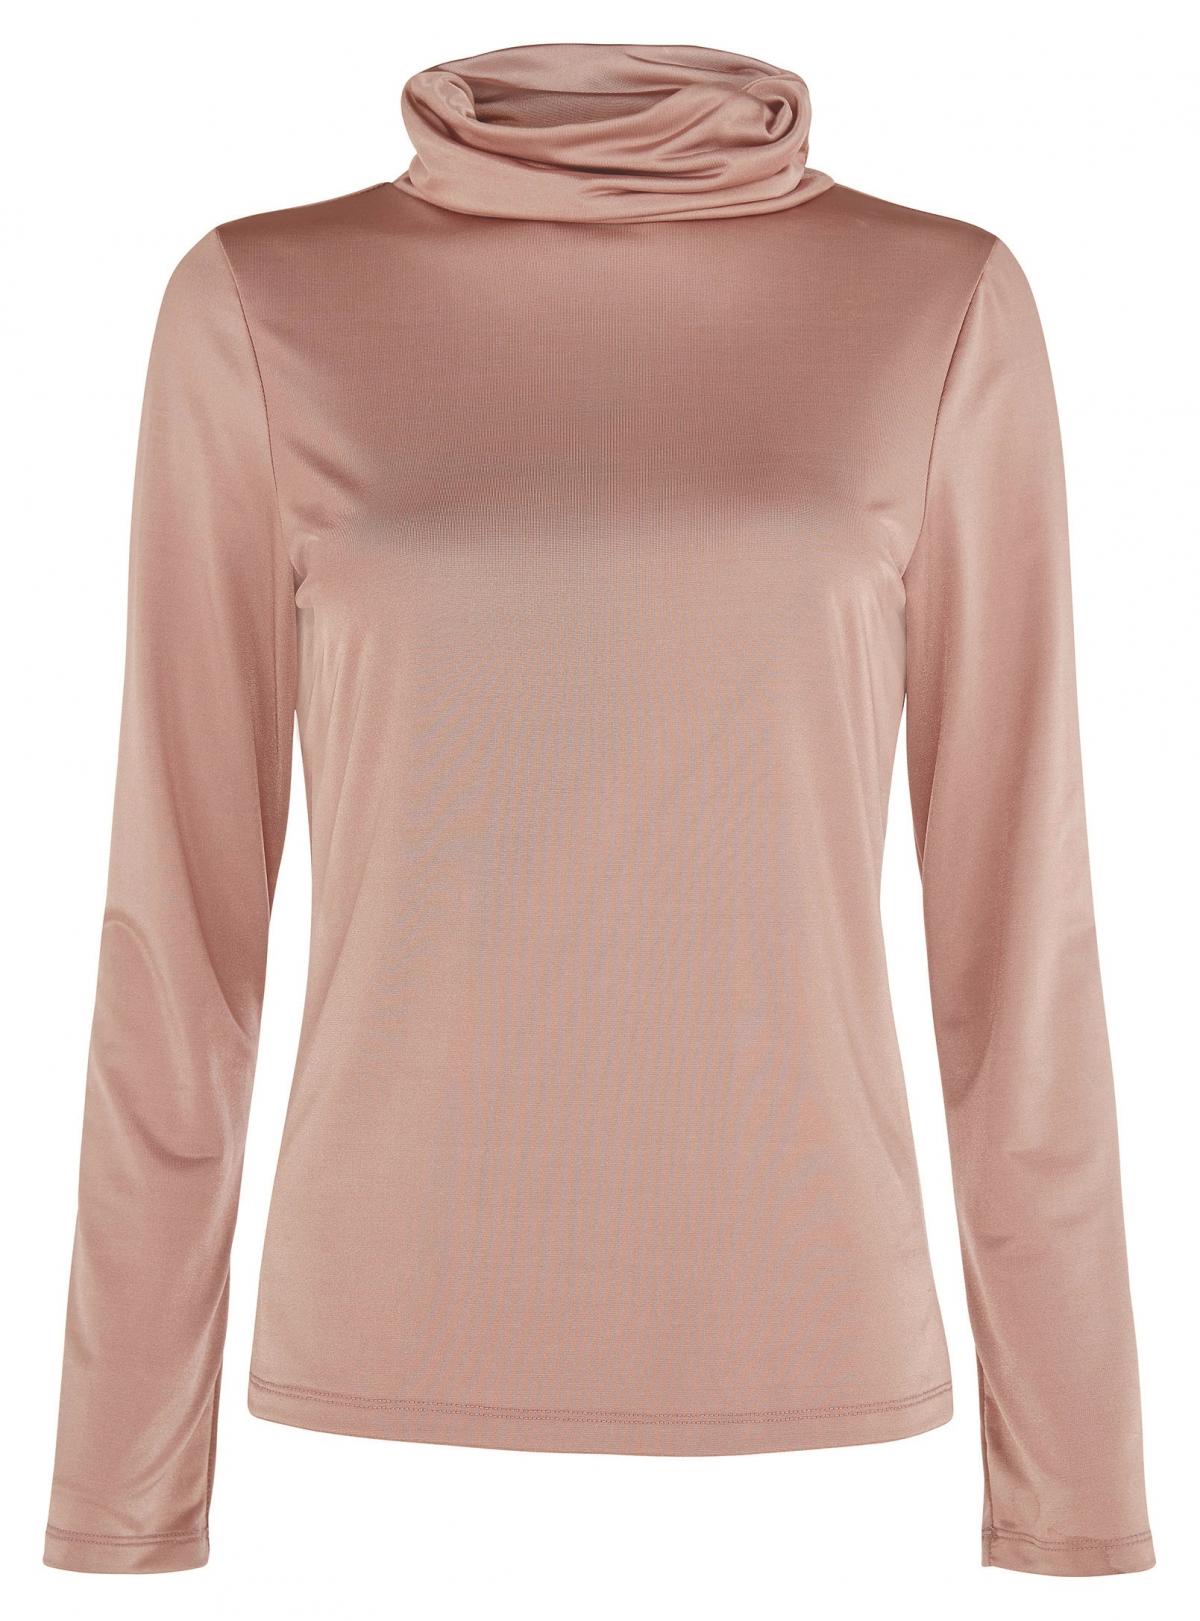 River Island, Roll Neck Top, £18